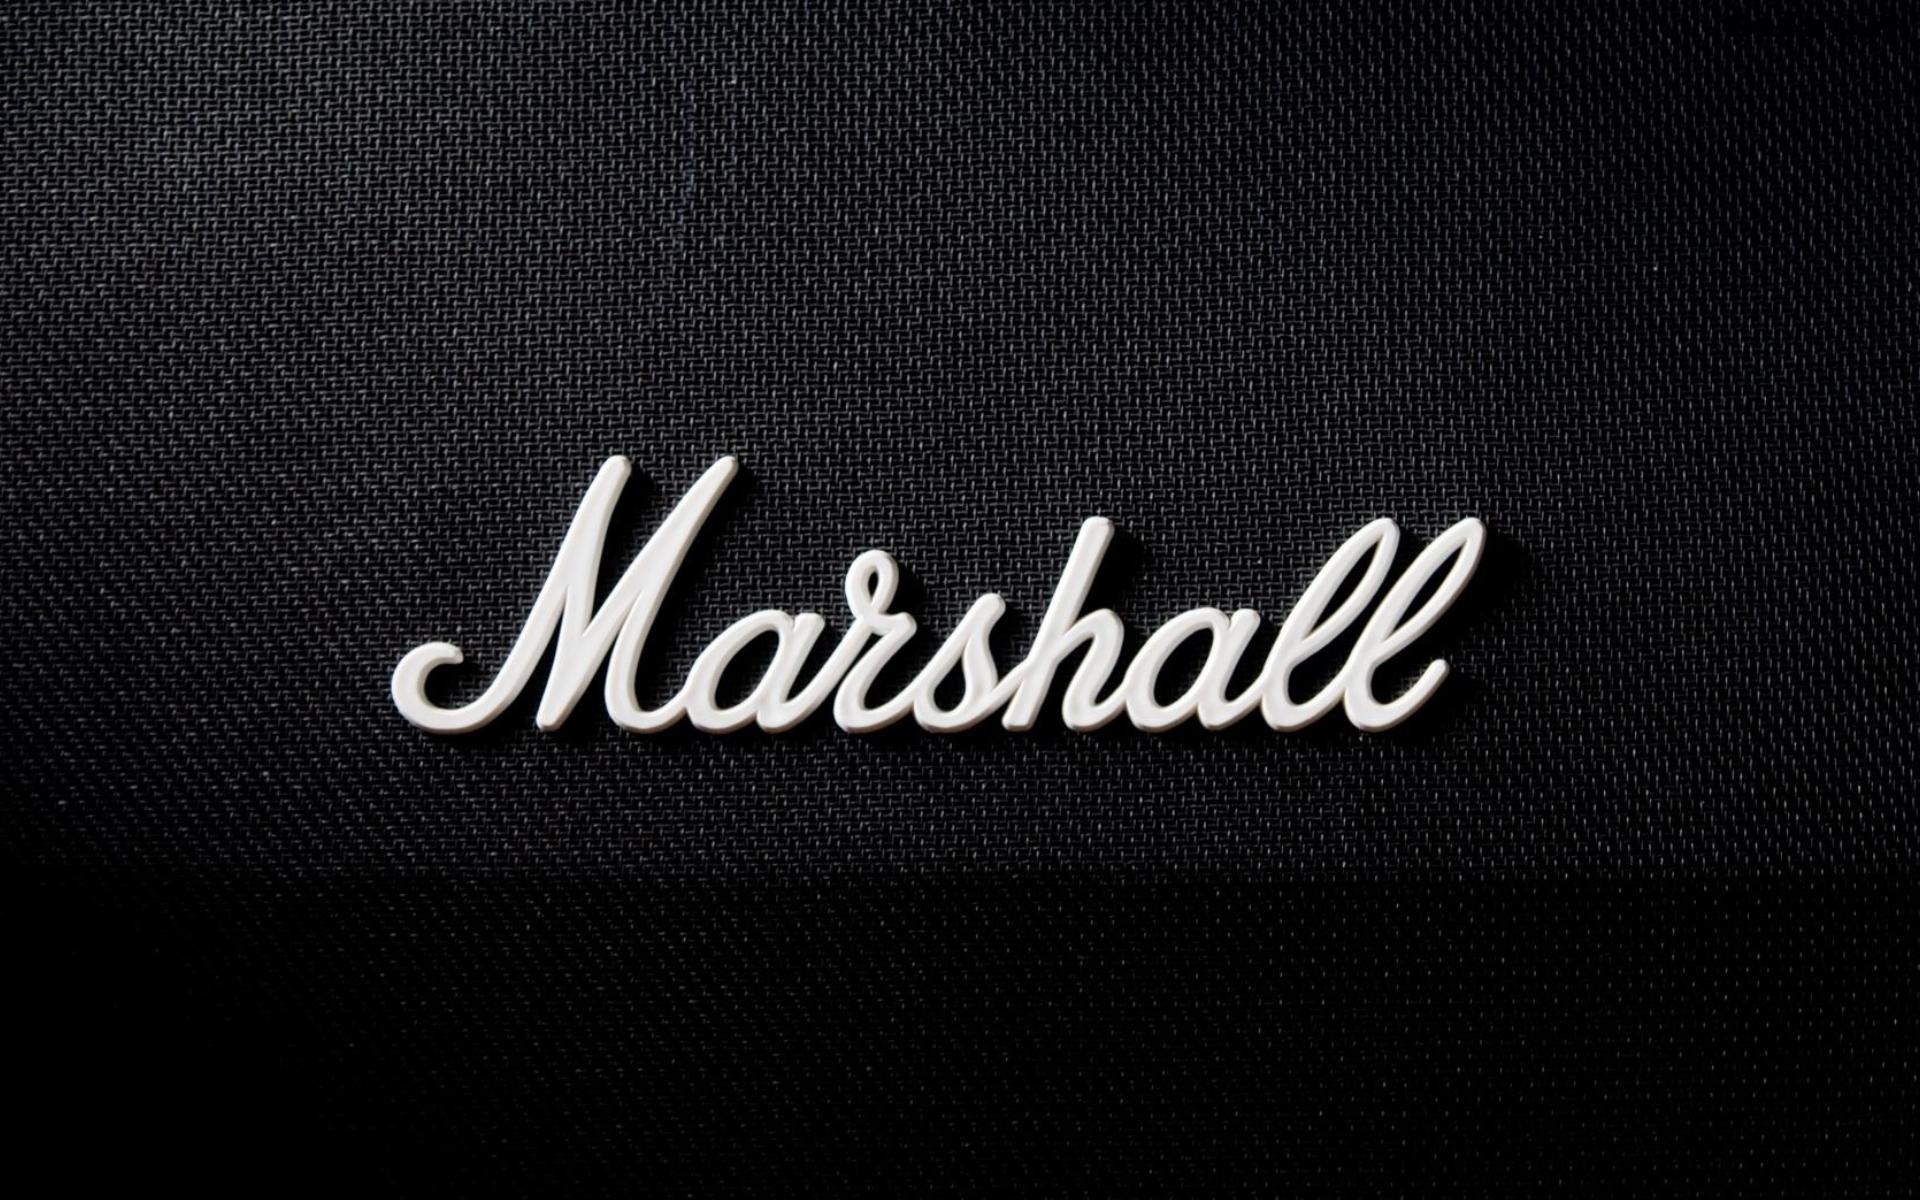 1 Marshall Hd Wallpapers Backgrounds Wallpaper Abyss HD Wallpapers Download Free Map Images Wallpaper [wallpaper684.blogspot.com]